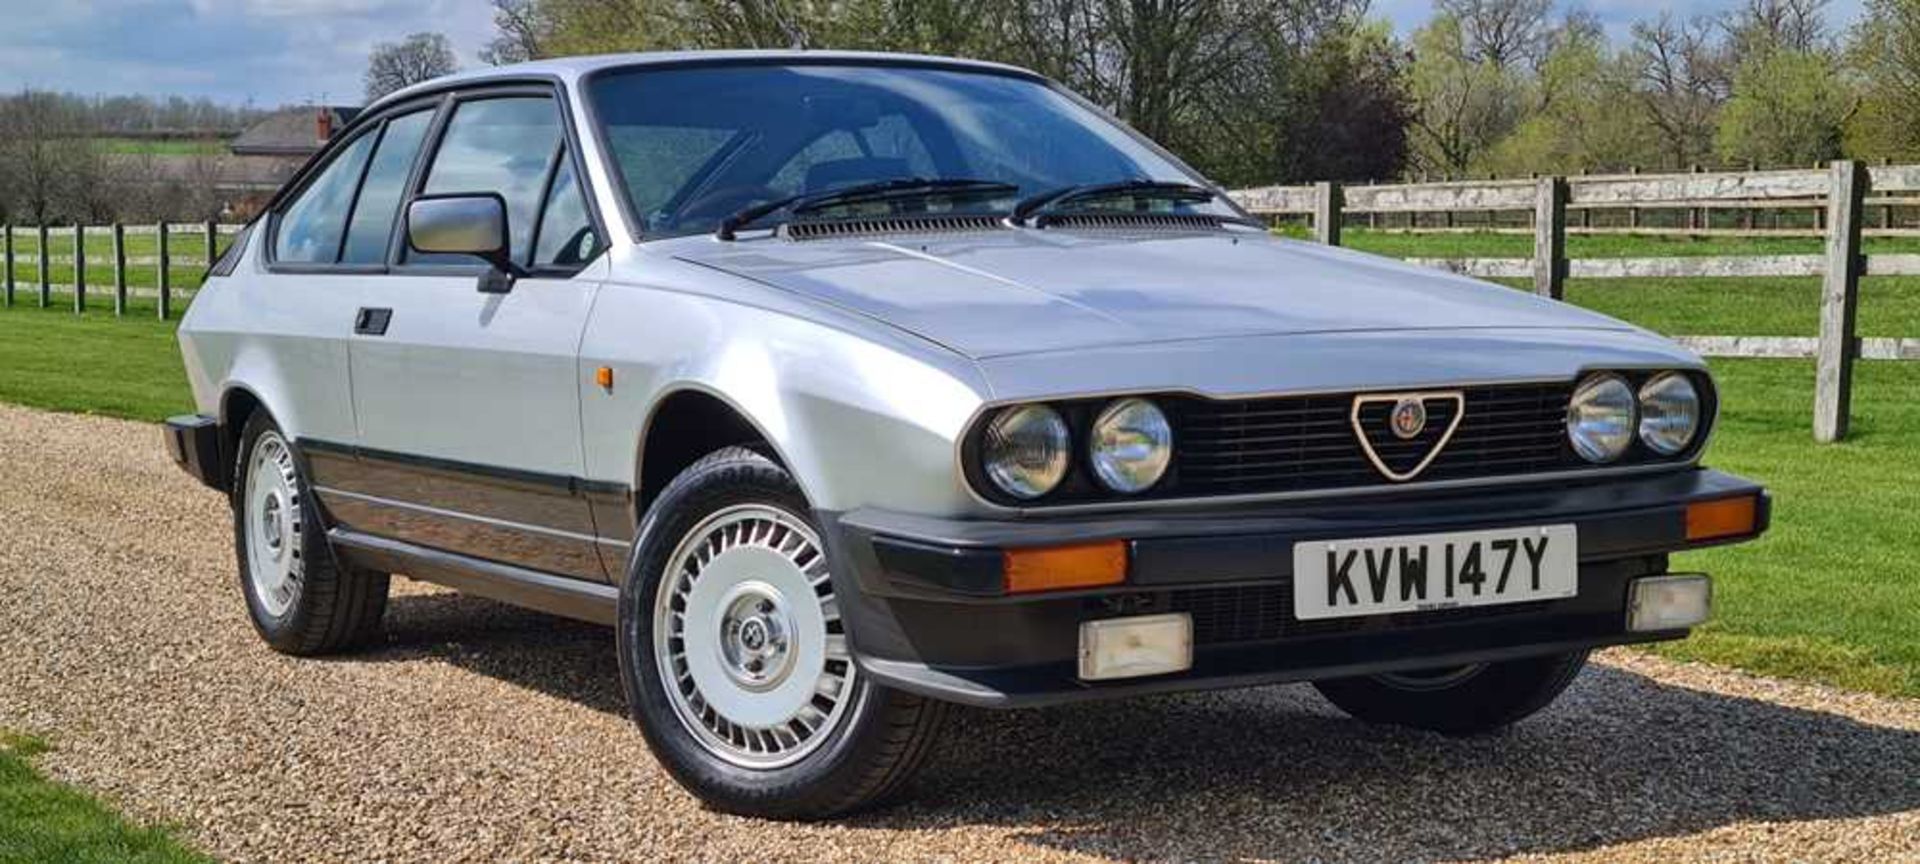 1983 Alfa Romeo GTV 2.0 litre Single family ownership and 48,000 miles from new - Image 9 of 51